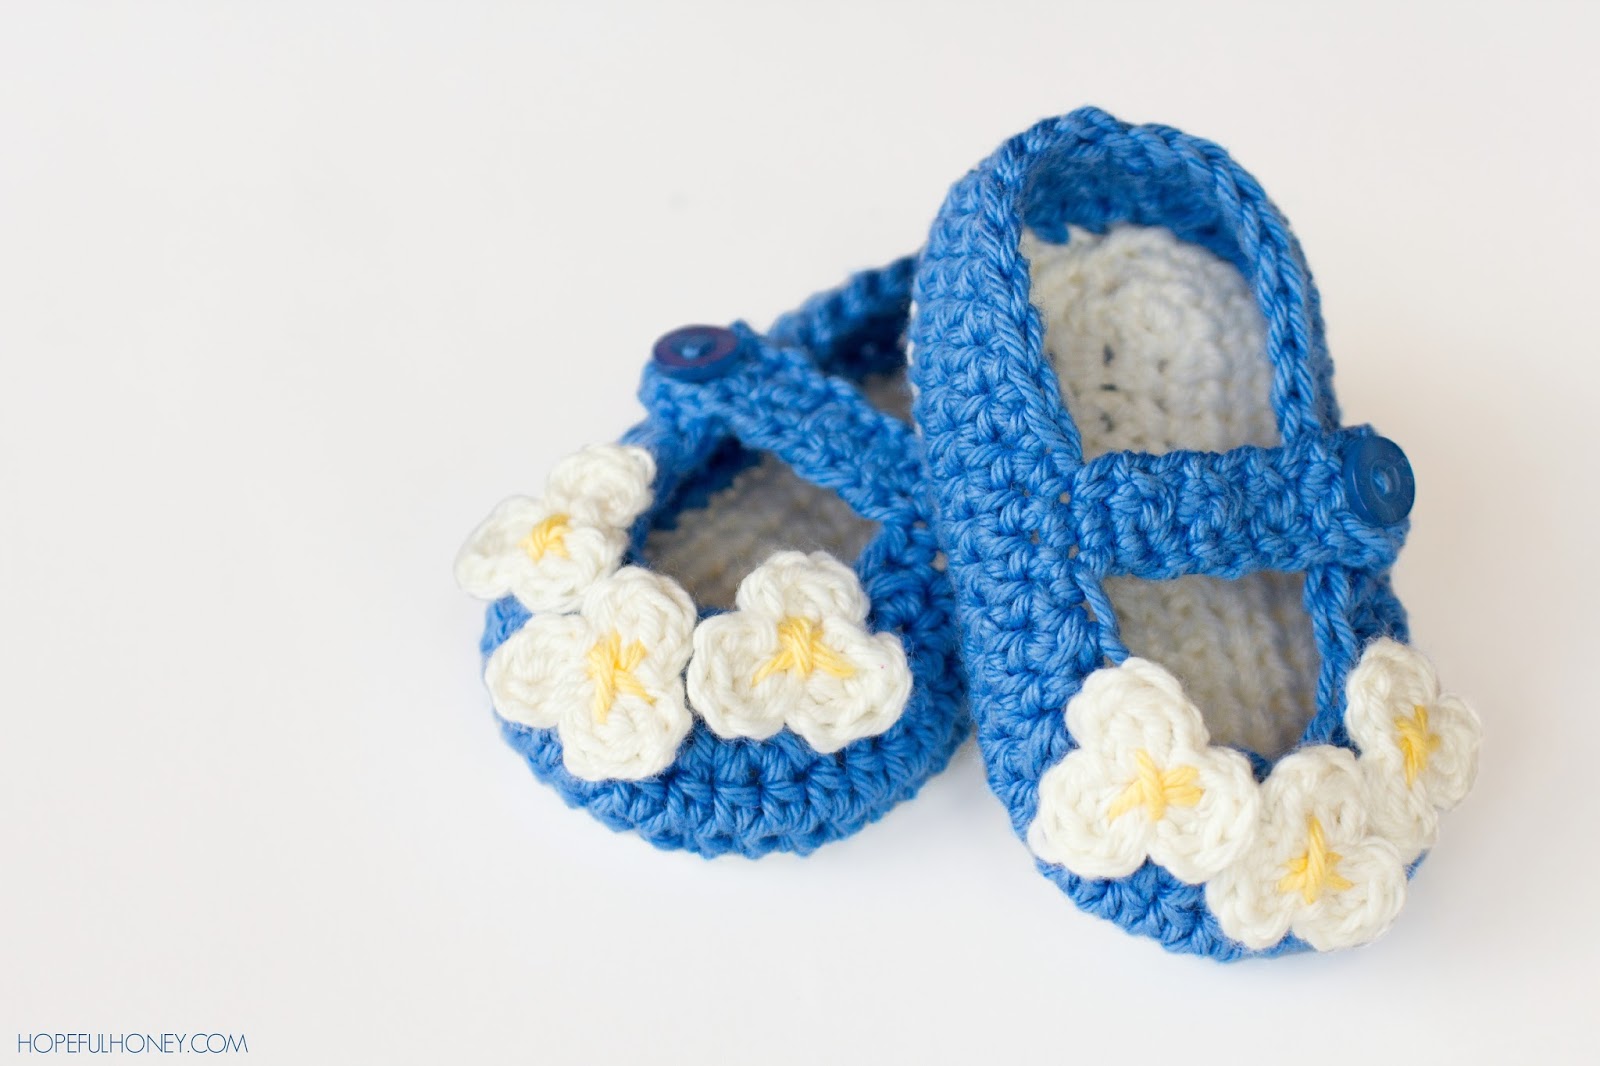 Mary Jane Baby Booties Crochet Pattern Wonderdiy1 Vintage Mary Jane Baby Booties Free Pattern and Guide